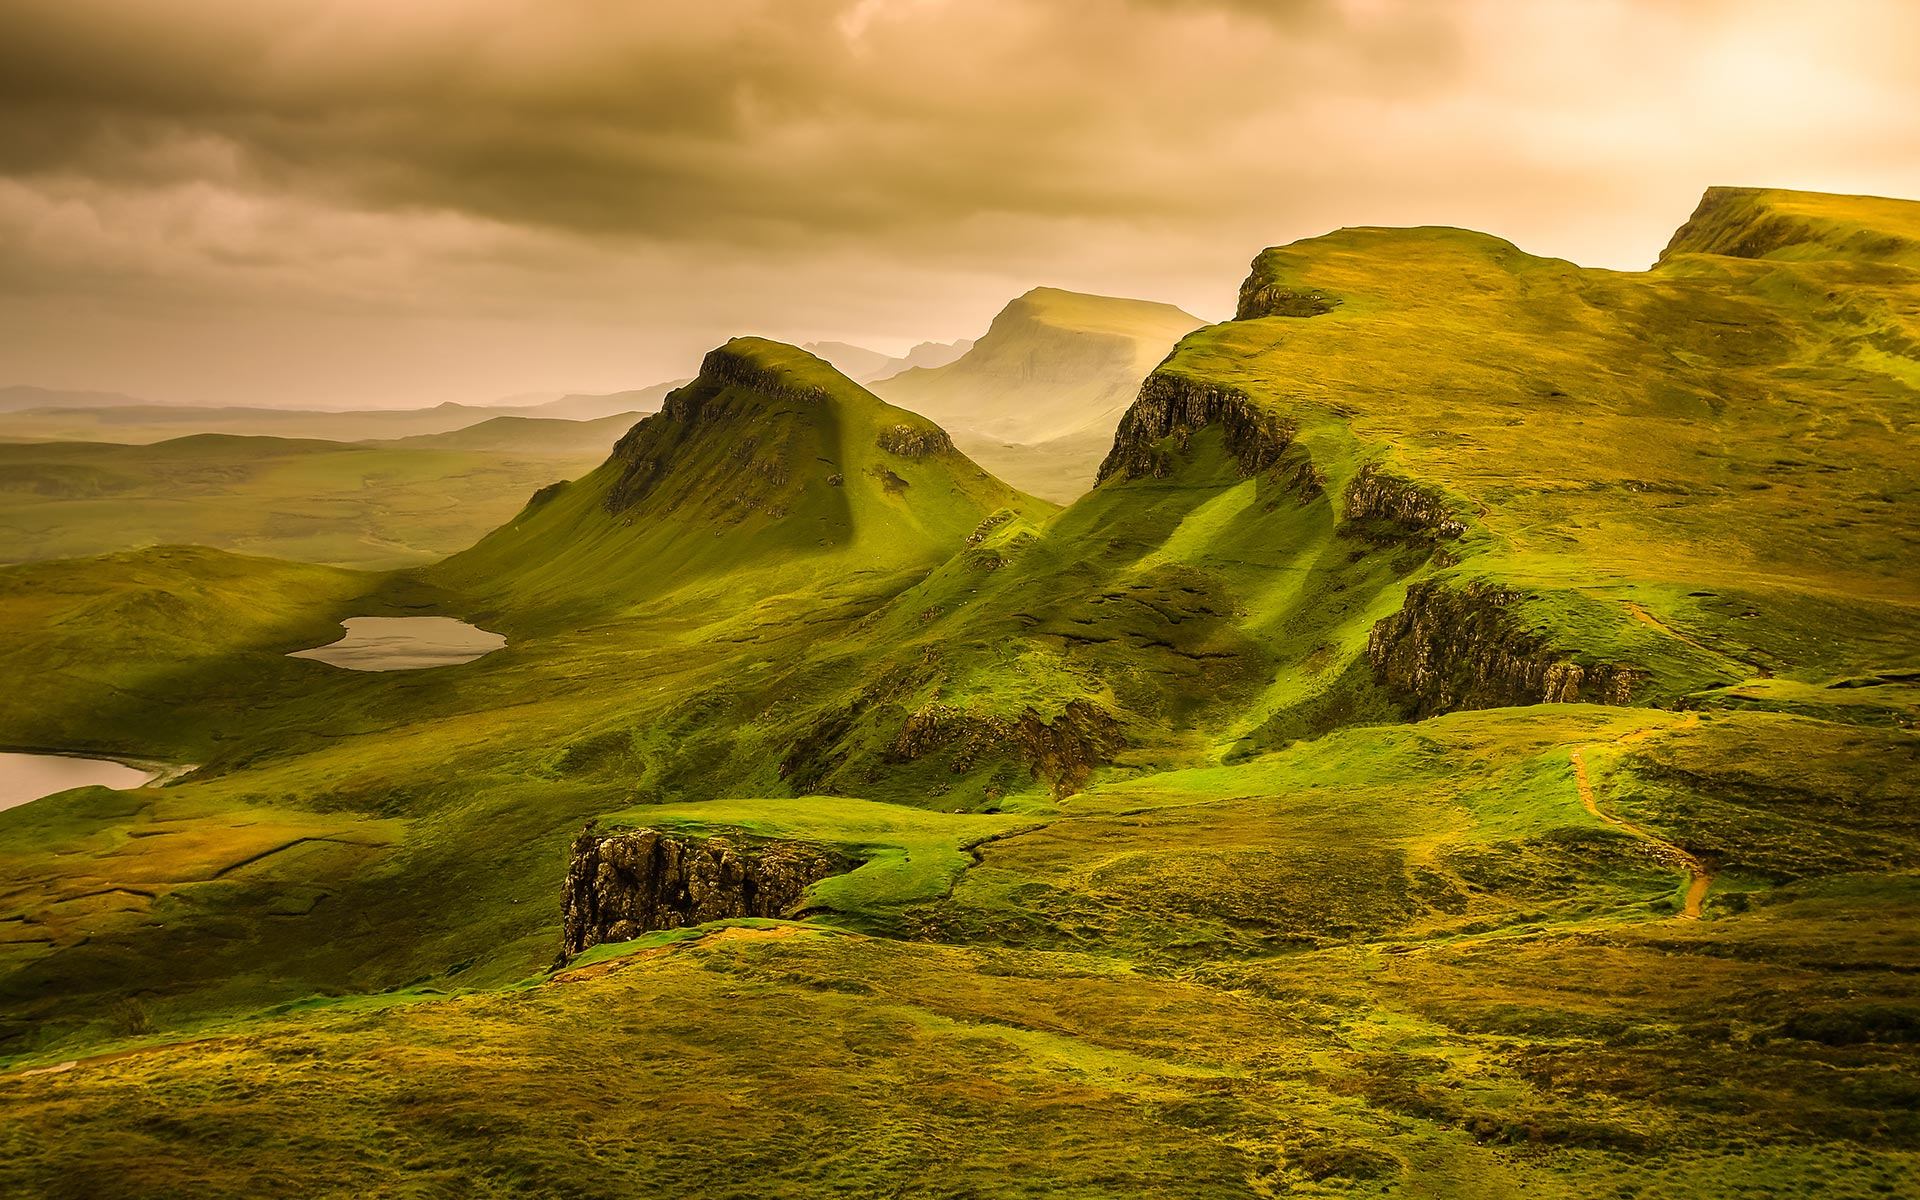 pictures of nature wallpapers,nature,natural landscape,highland,mountainous landforms,green